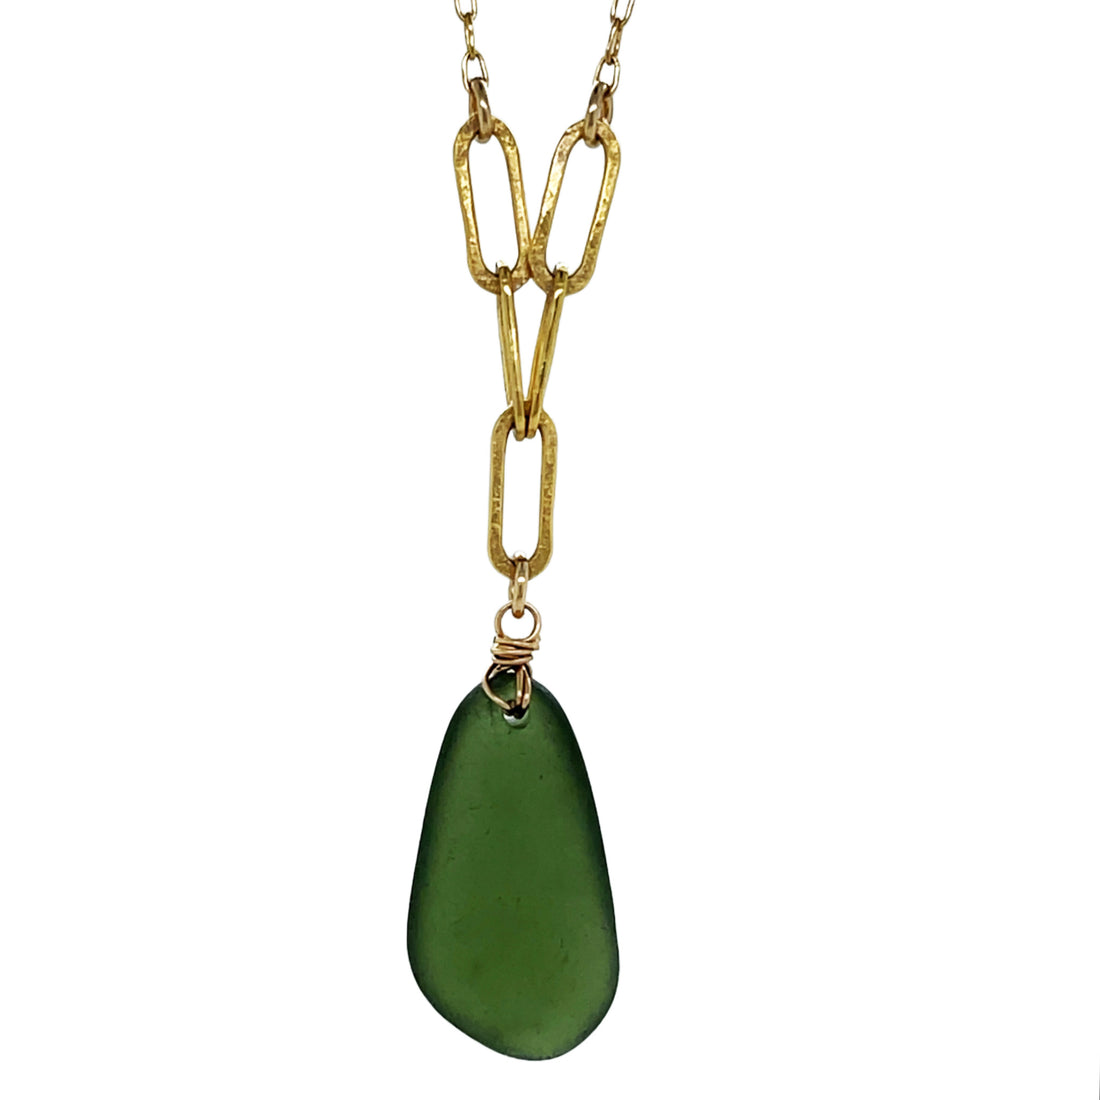 Short gold chain necklace with antique sea glass pendant and matte-hammered links